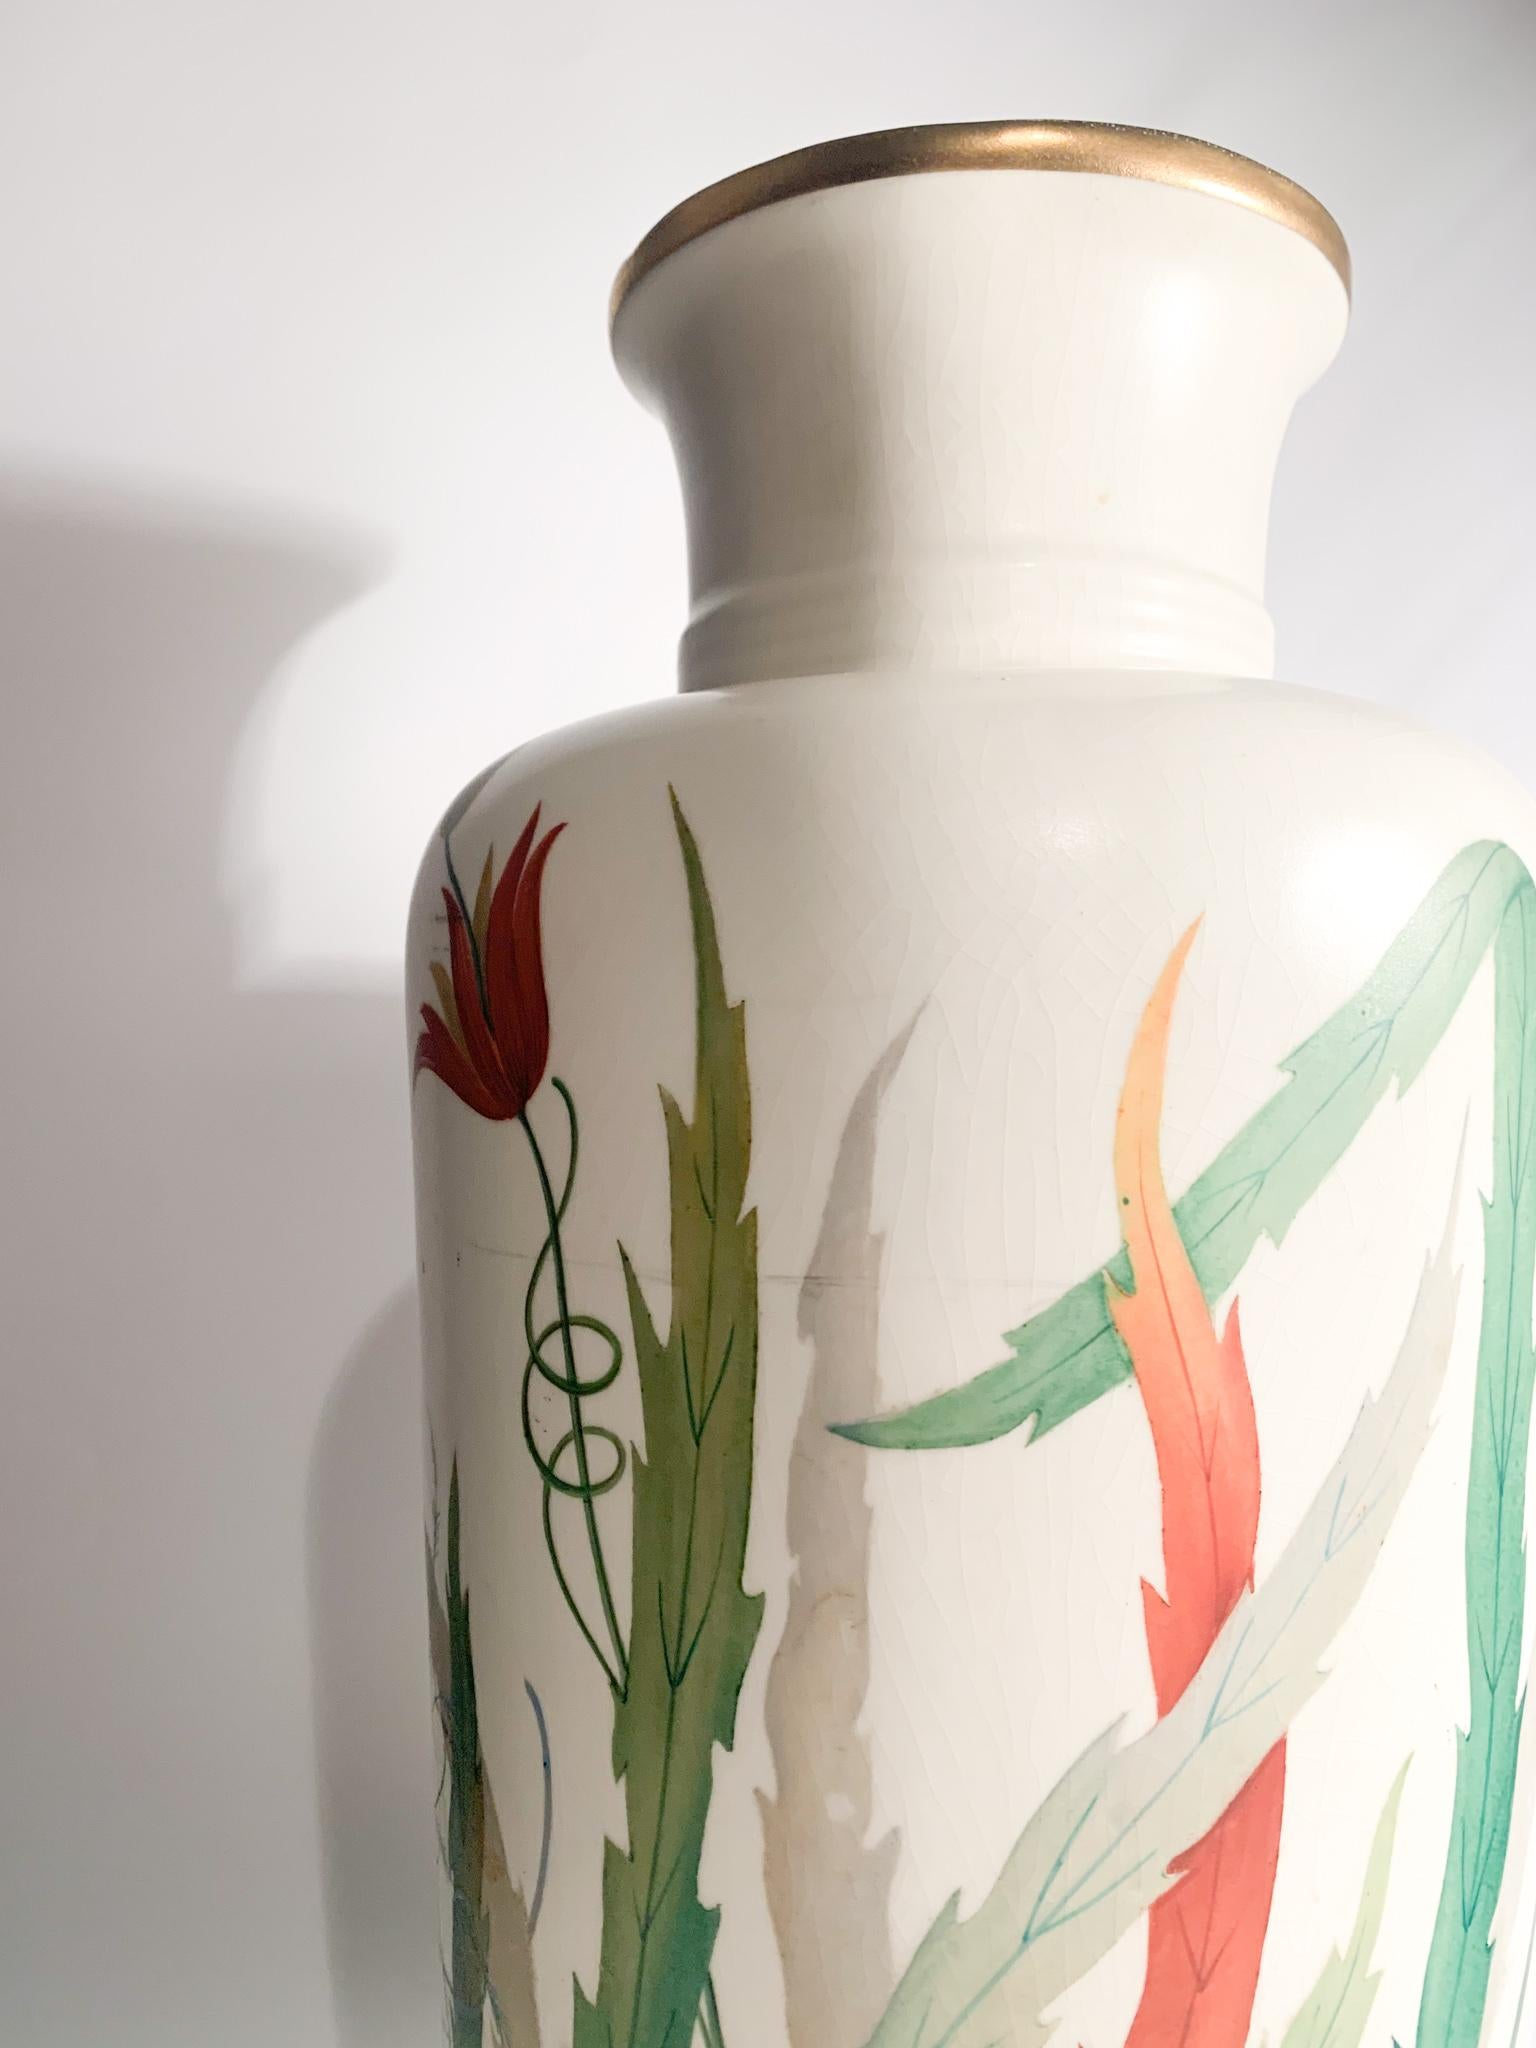 Porcelain Vase by Richard Ginori Hand Painted from the 1920s For Sale 2